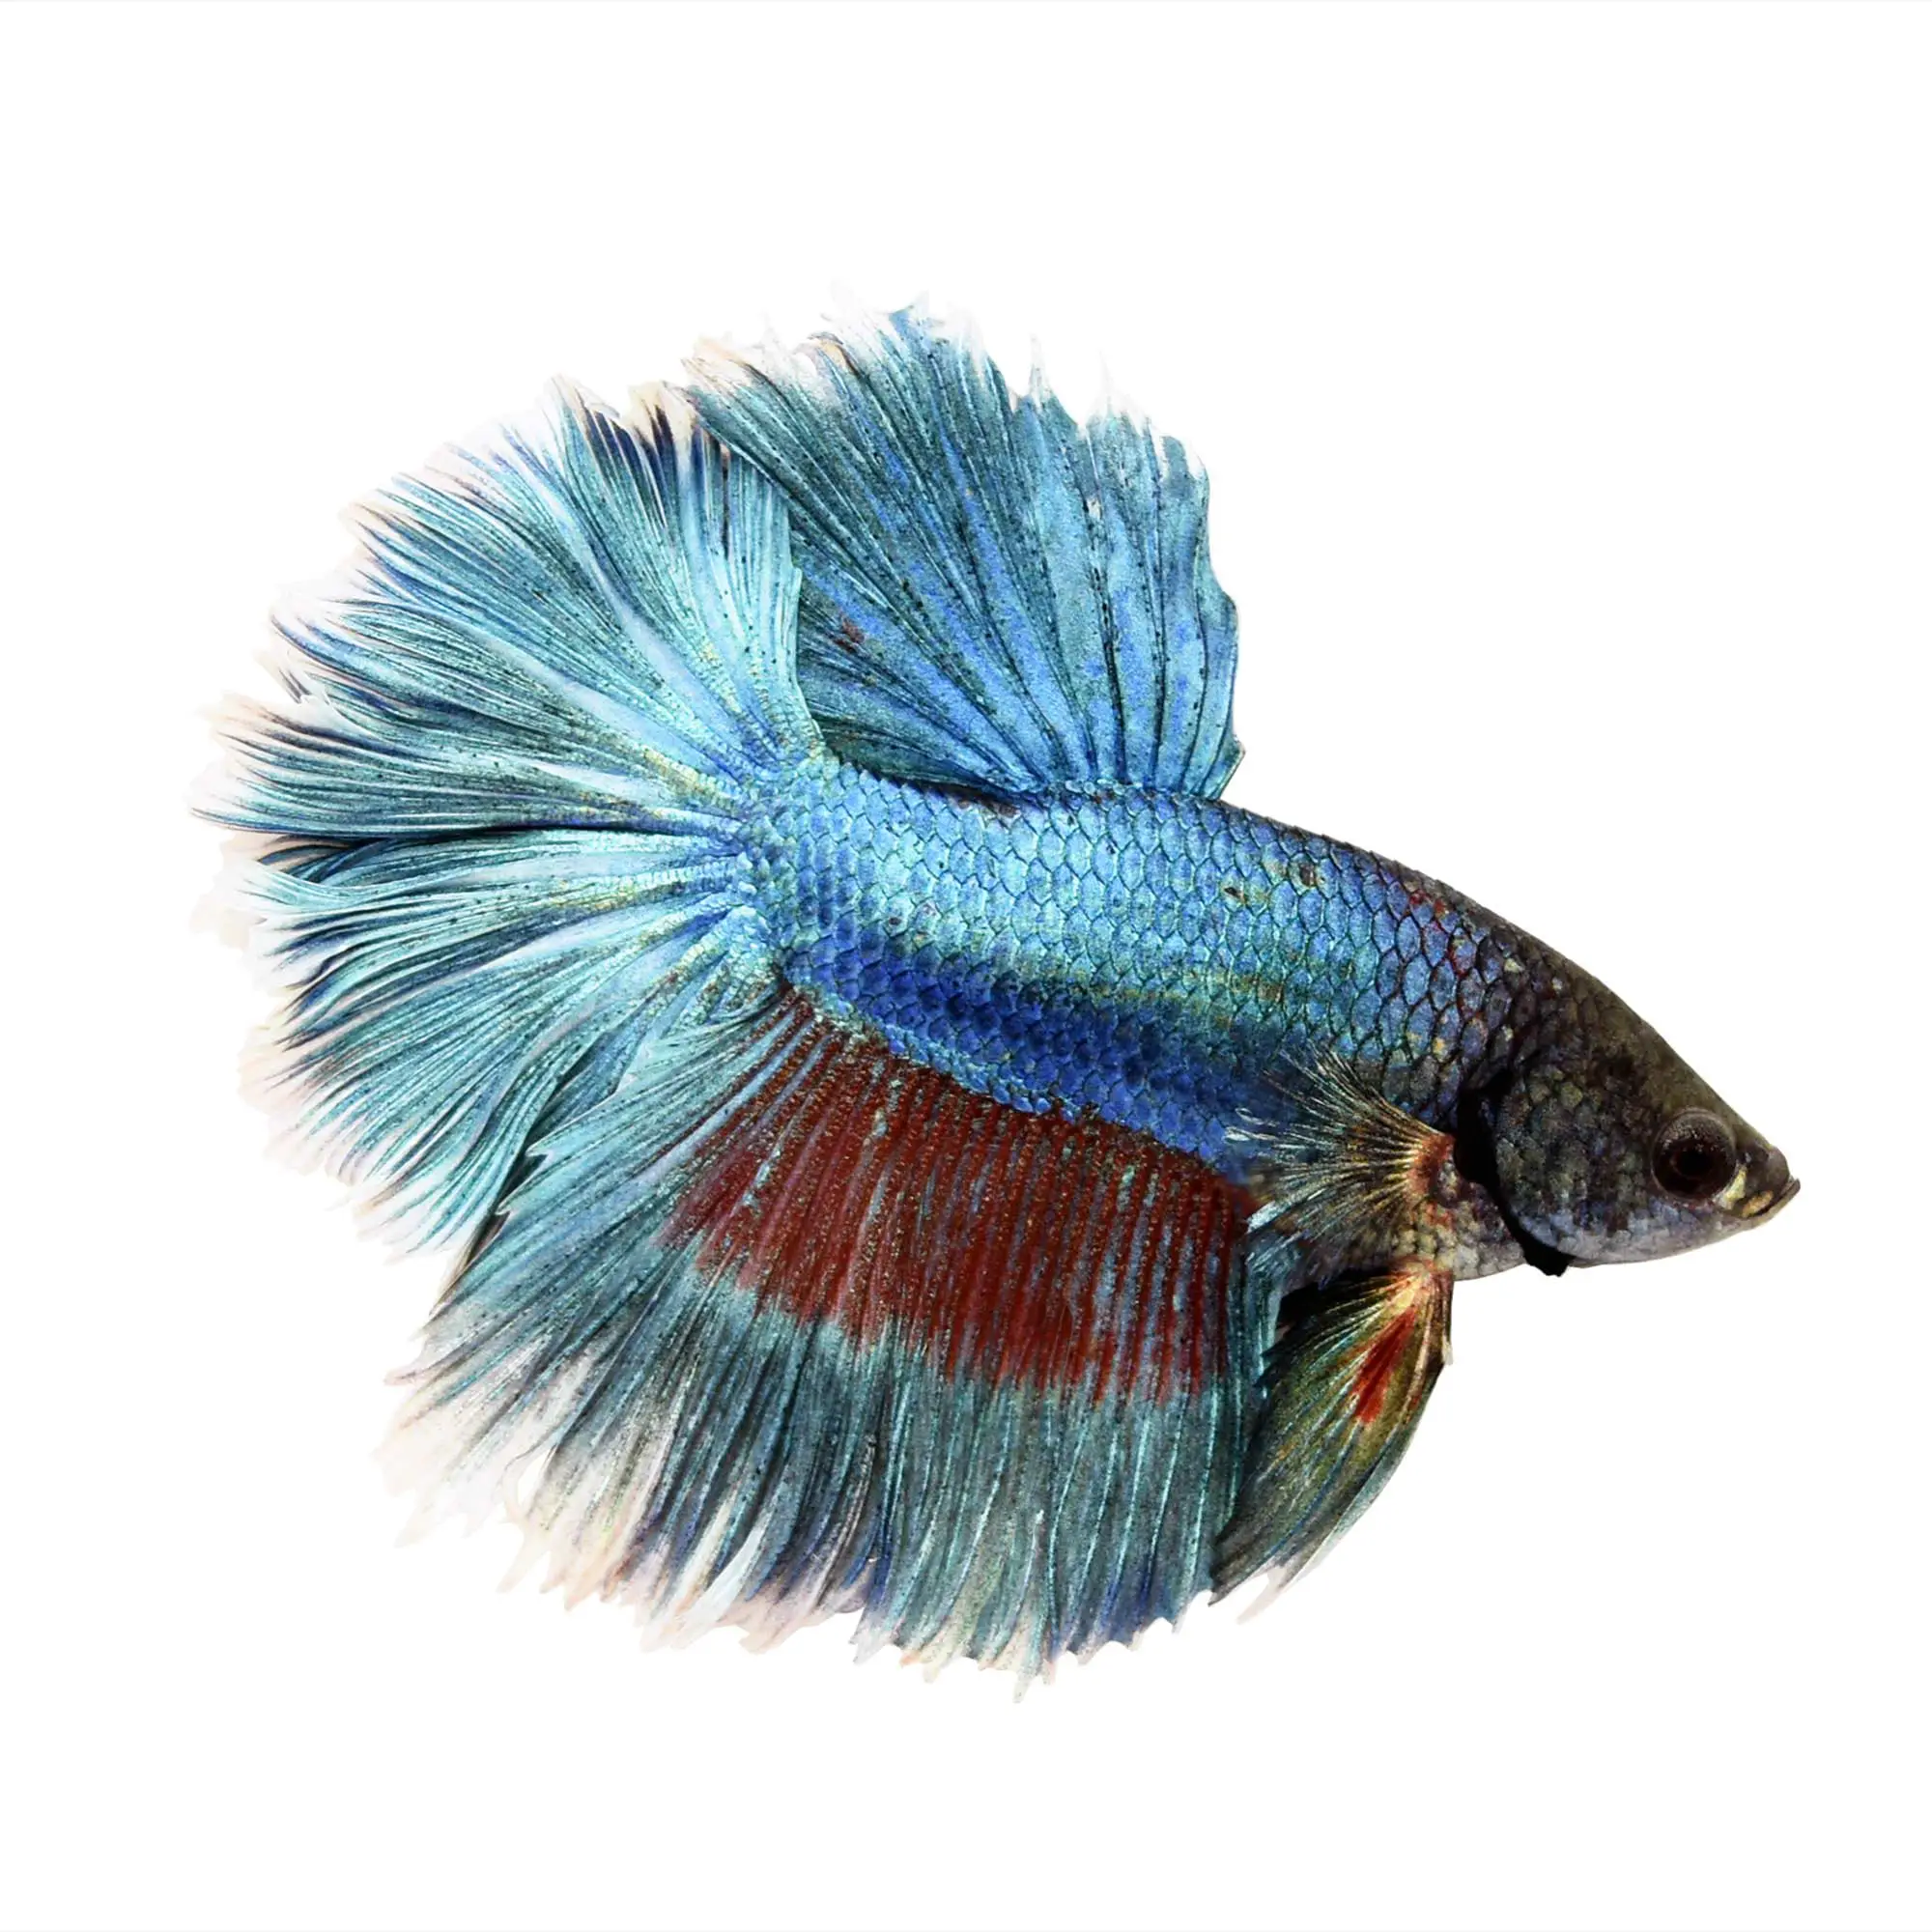 A Look at the Gorgeous Rose Petal Betta Fish